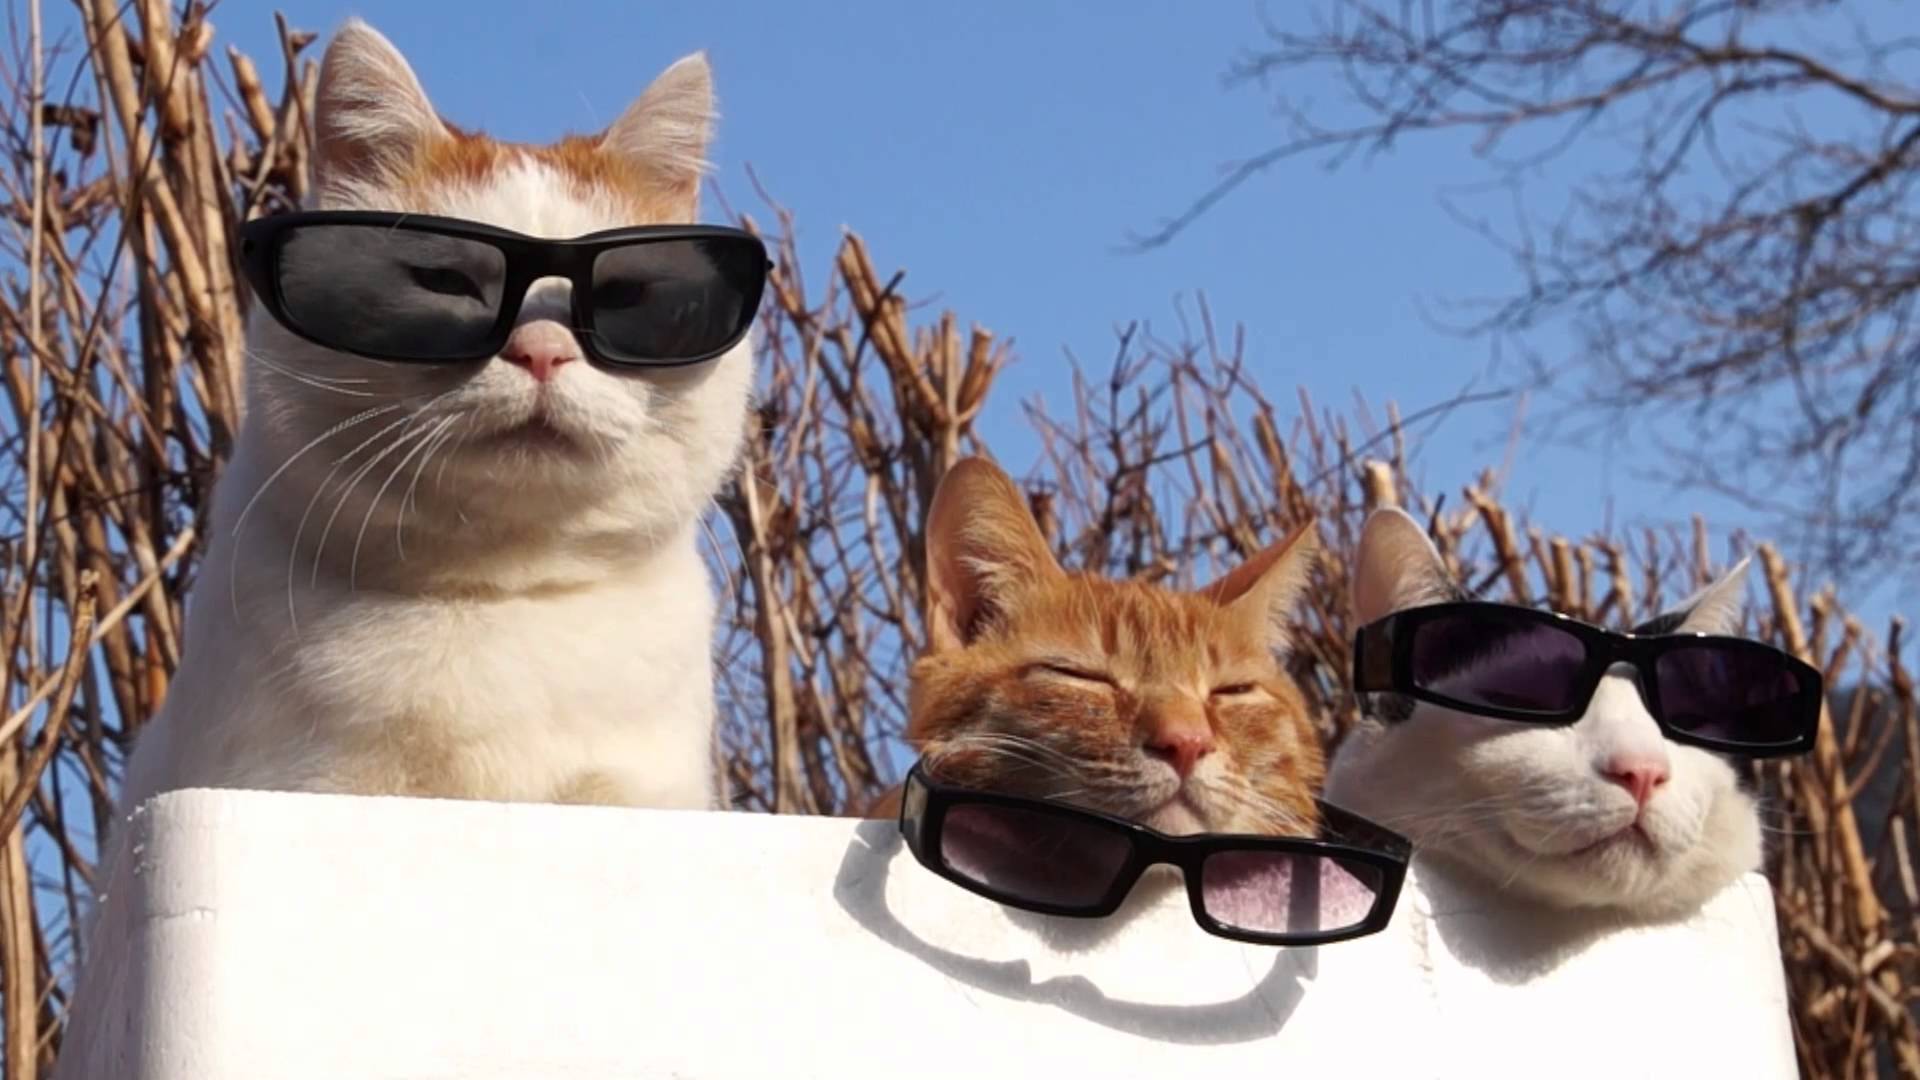 Cats with Sunglasses doing nothing | Dravens Tales from the Crypt